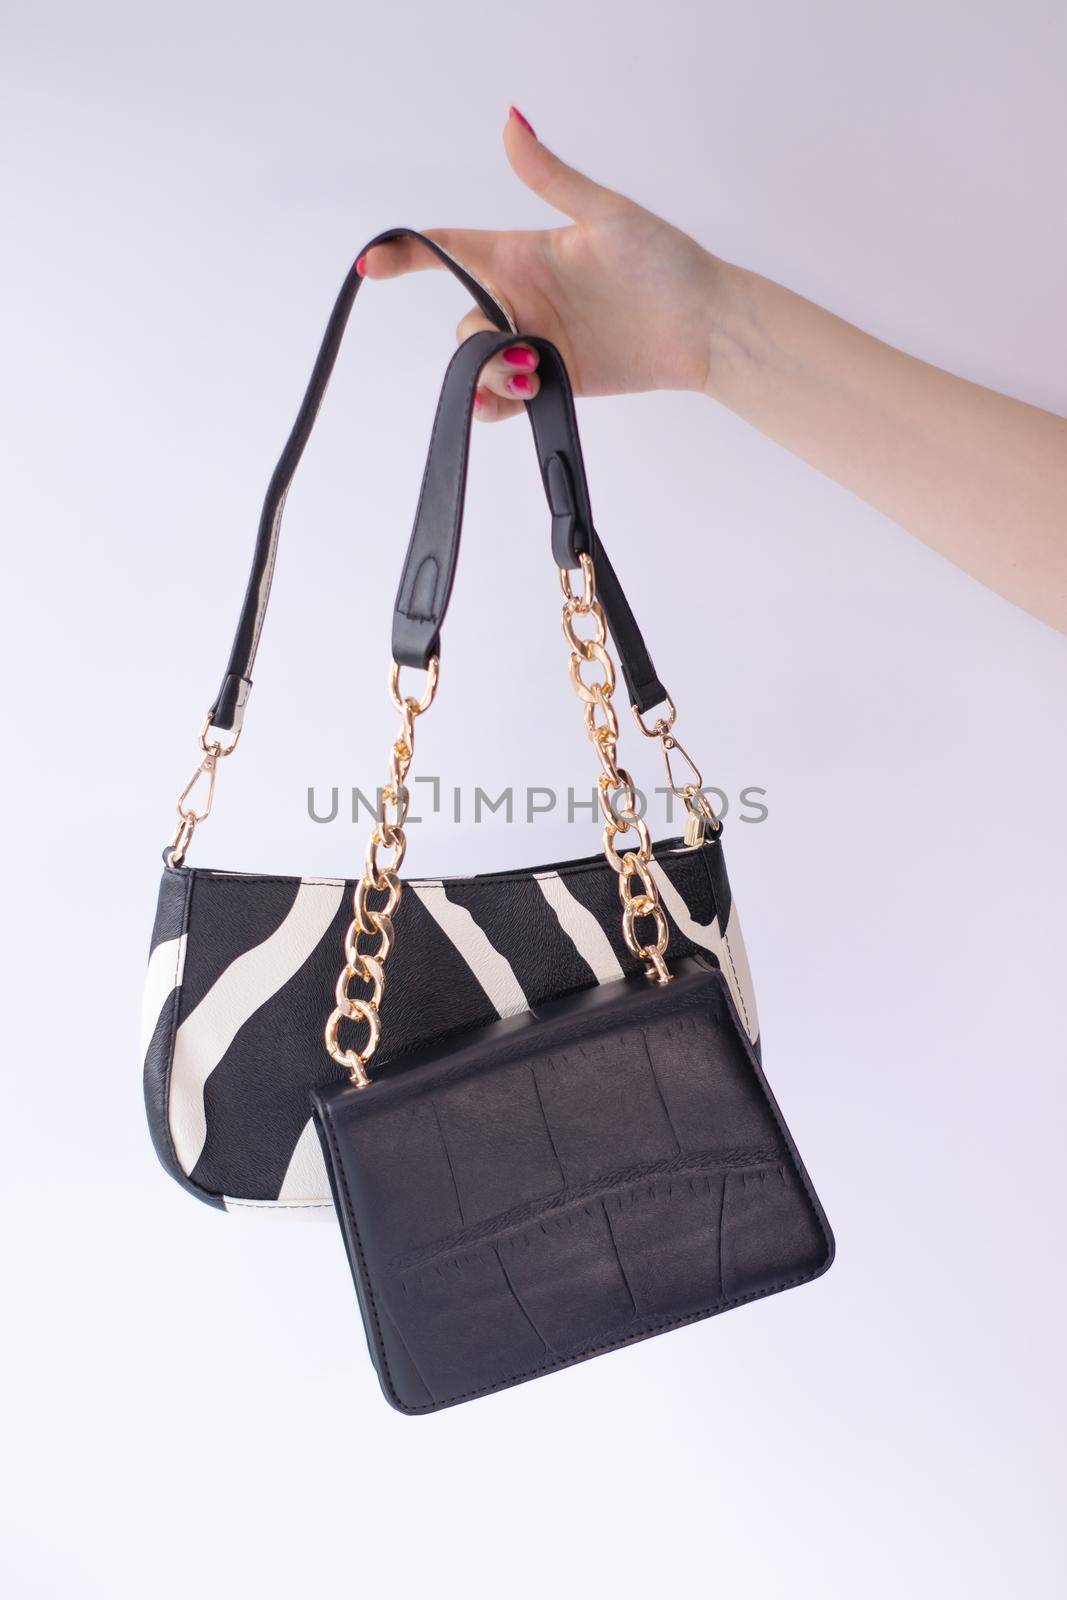 close up of womans hand holding fashionable little black bag. Product photography. stylish handbag and purse for women.